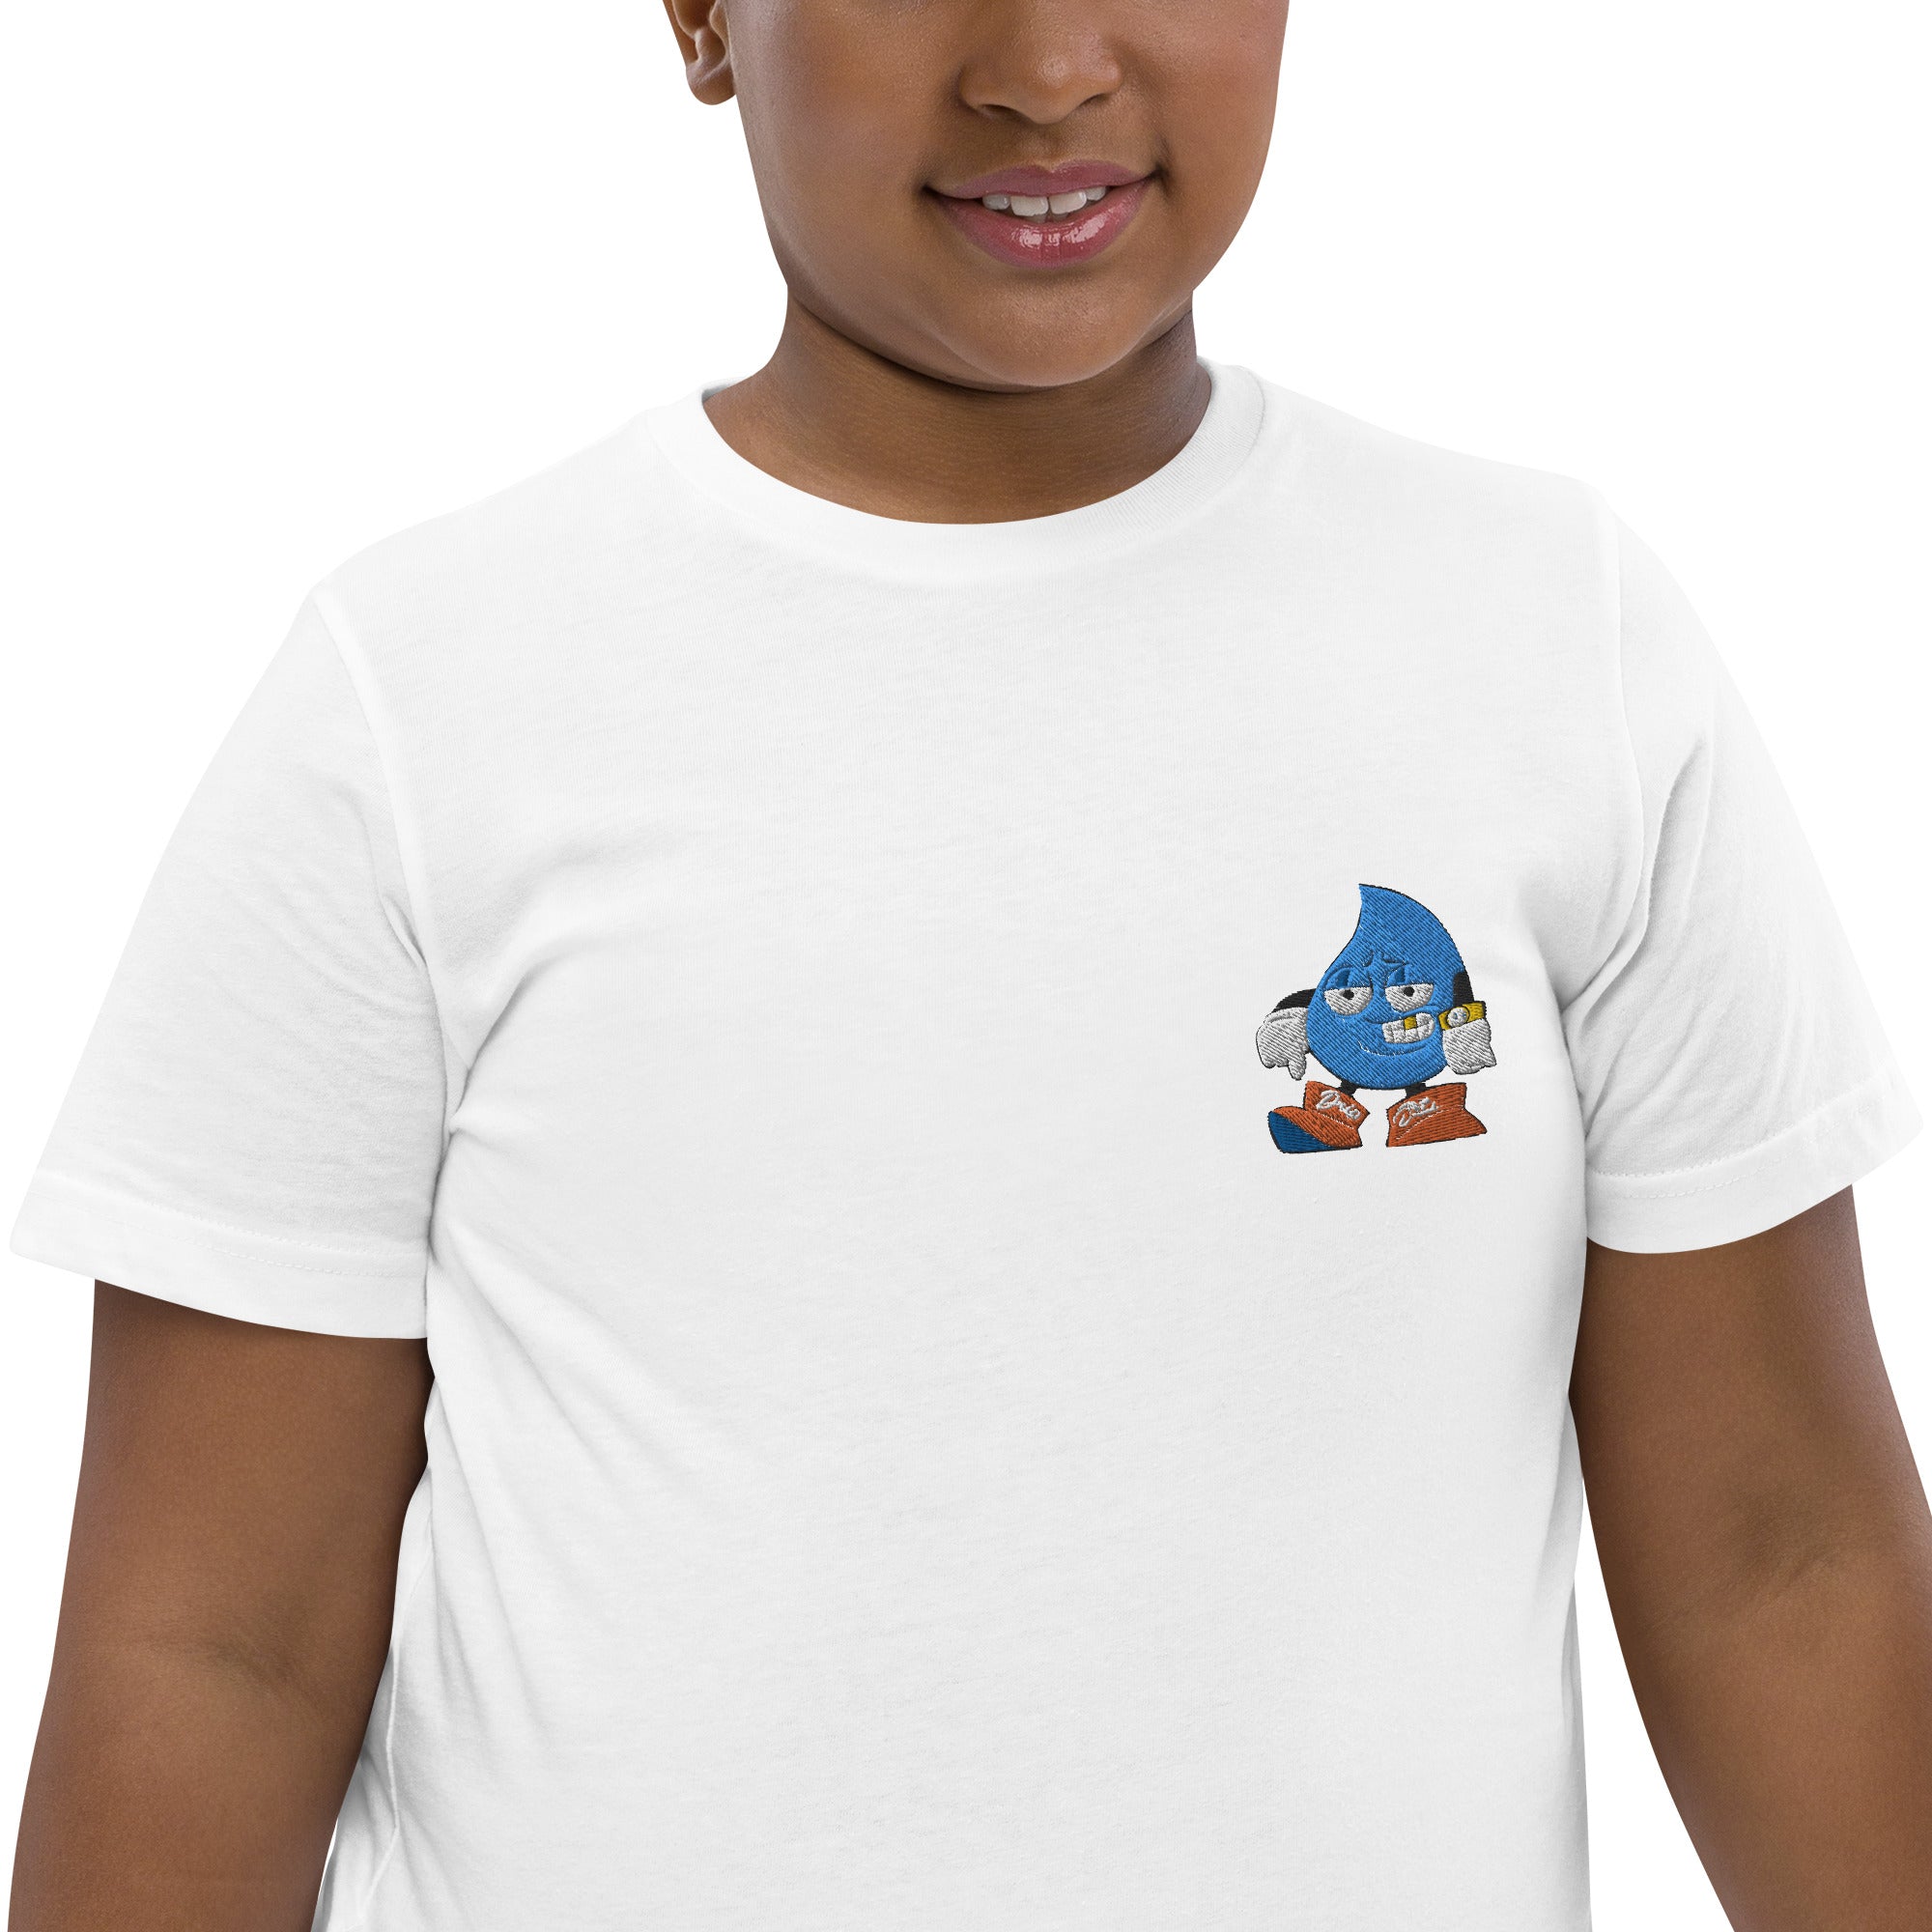 Youth T -Shirt